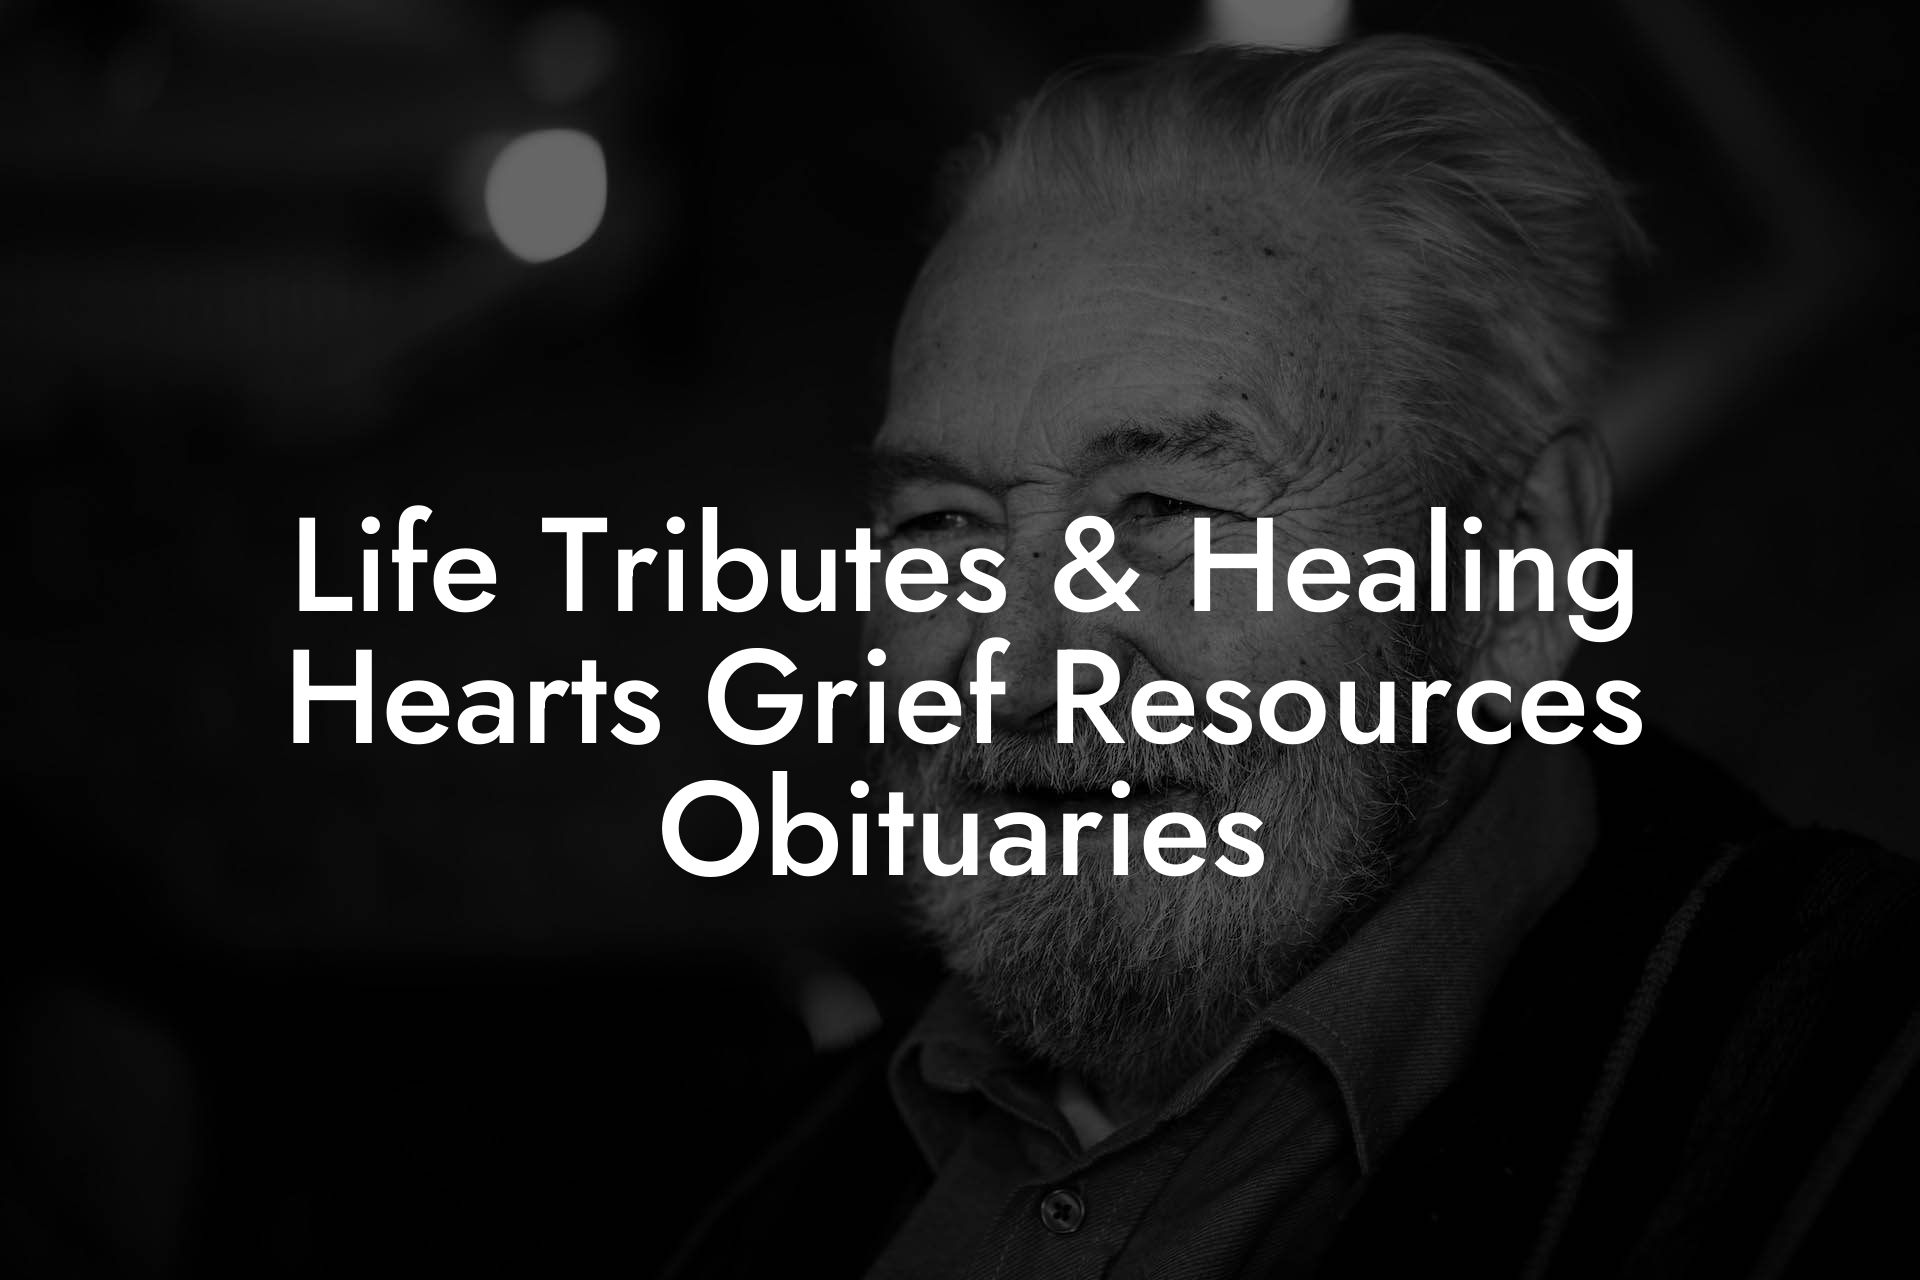 Life Tributes & Healing Hearts Grief Resources Obituaries